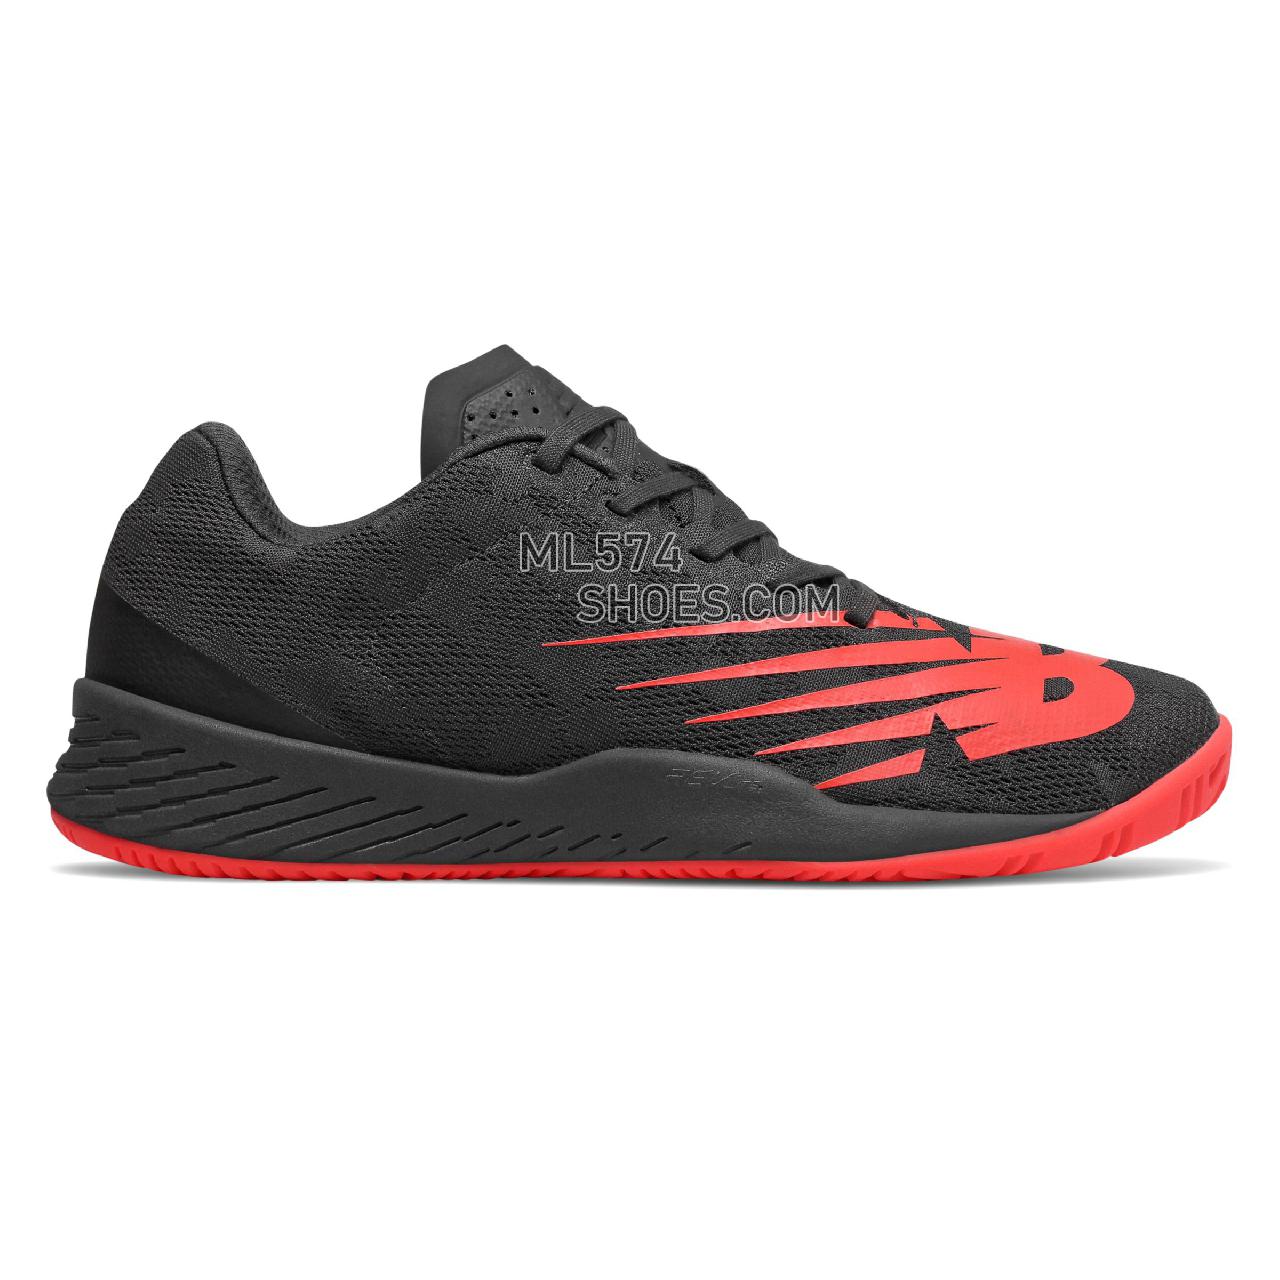 New Balance 896v3 - Men's Tennis - Black with Energy Red - MCH896R3